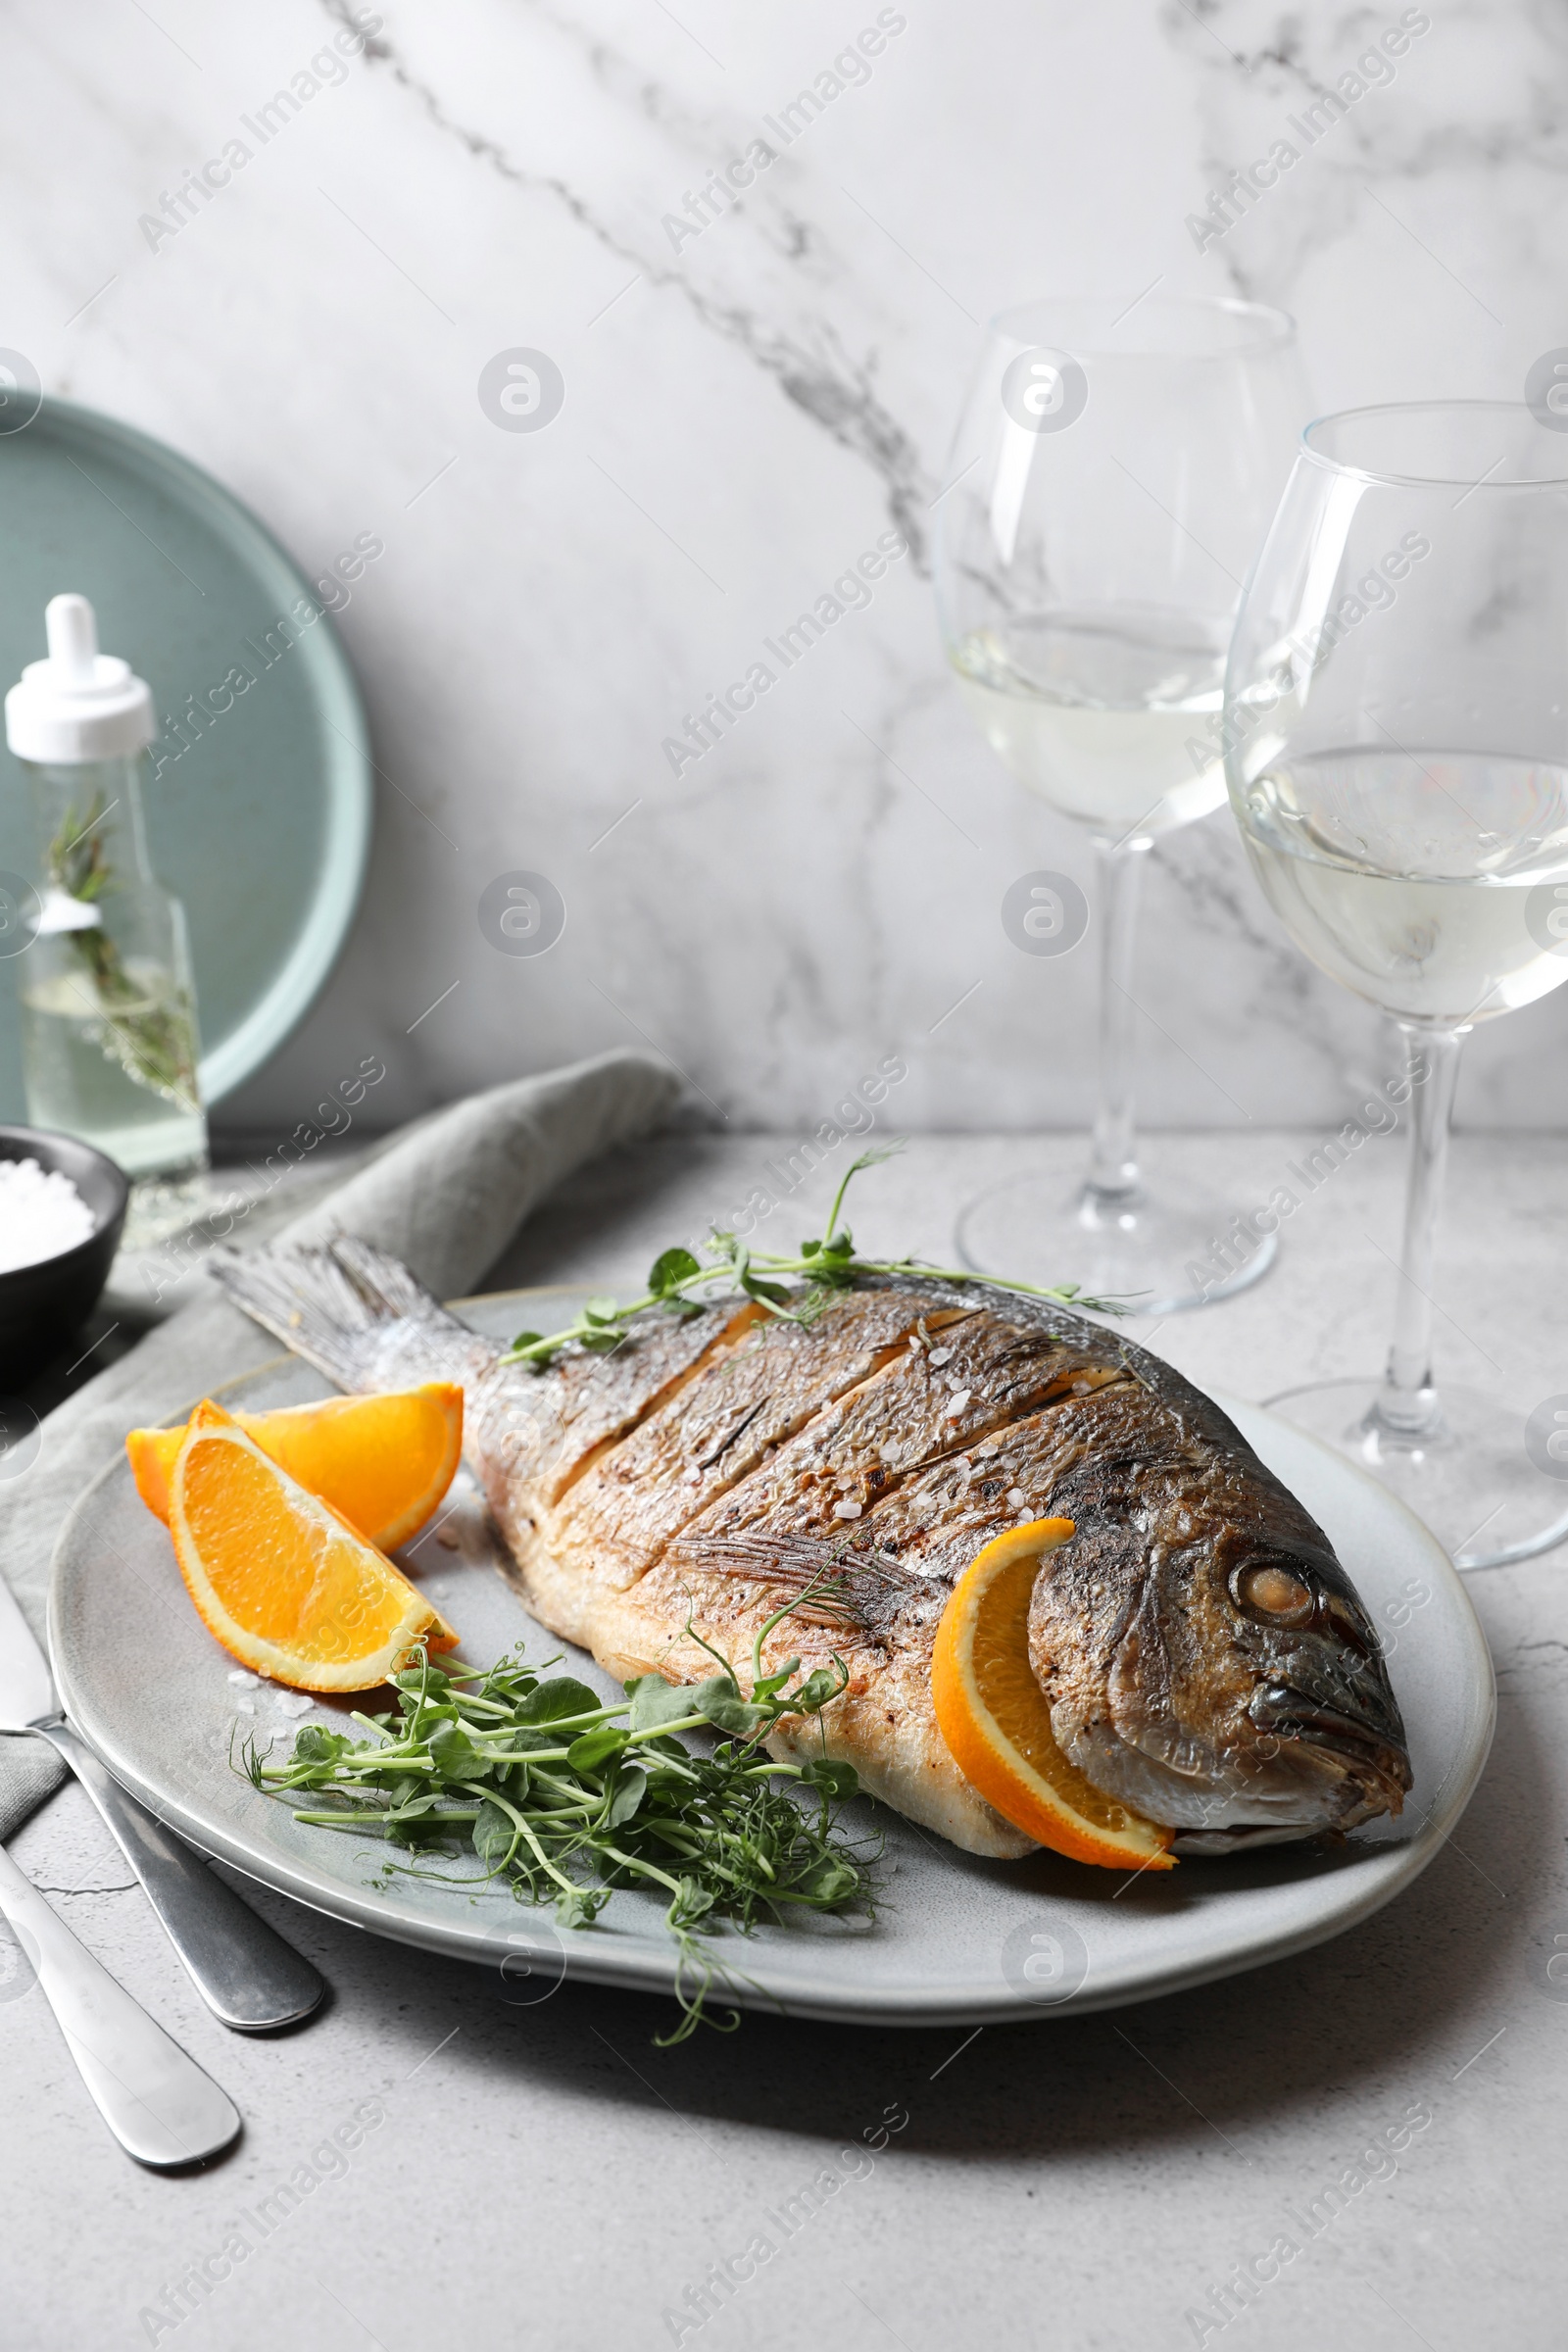 Photo of Seafood. Delicious baked fish served with orange and microgreens on light table